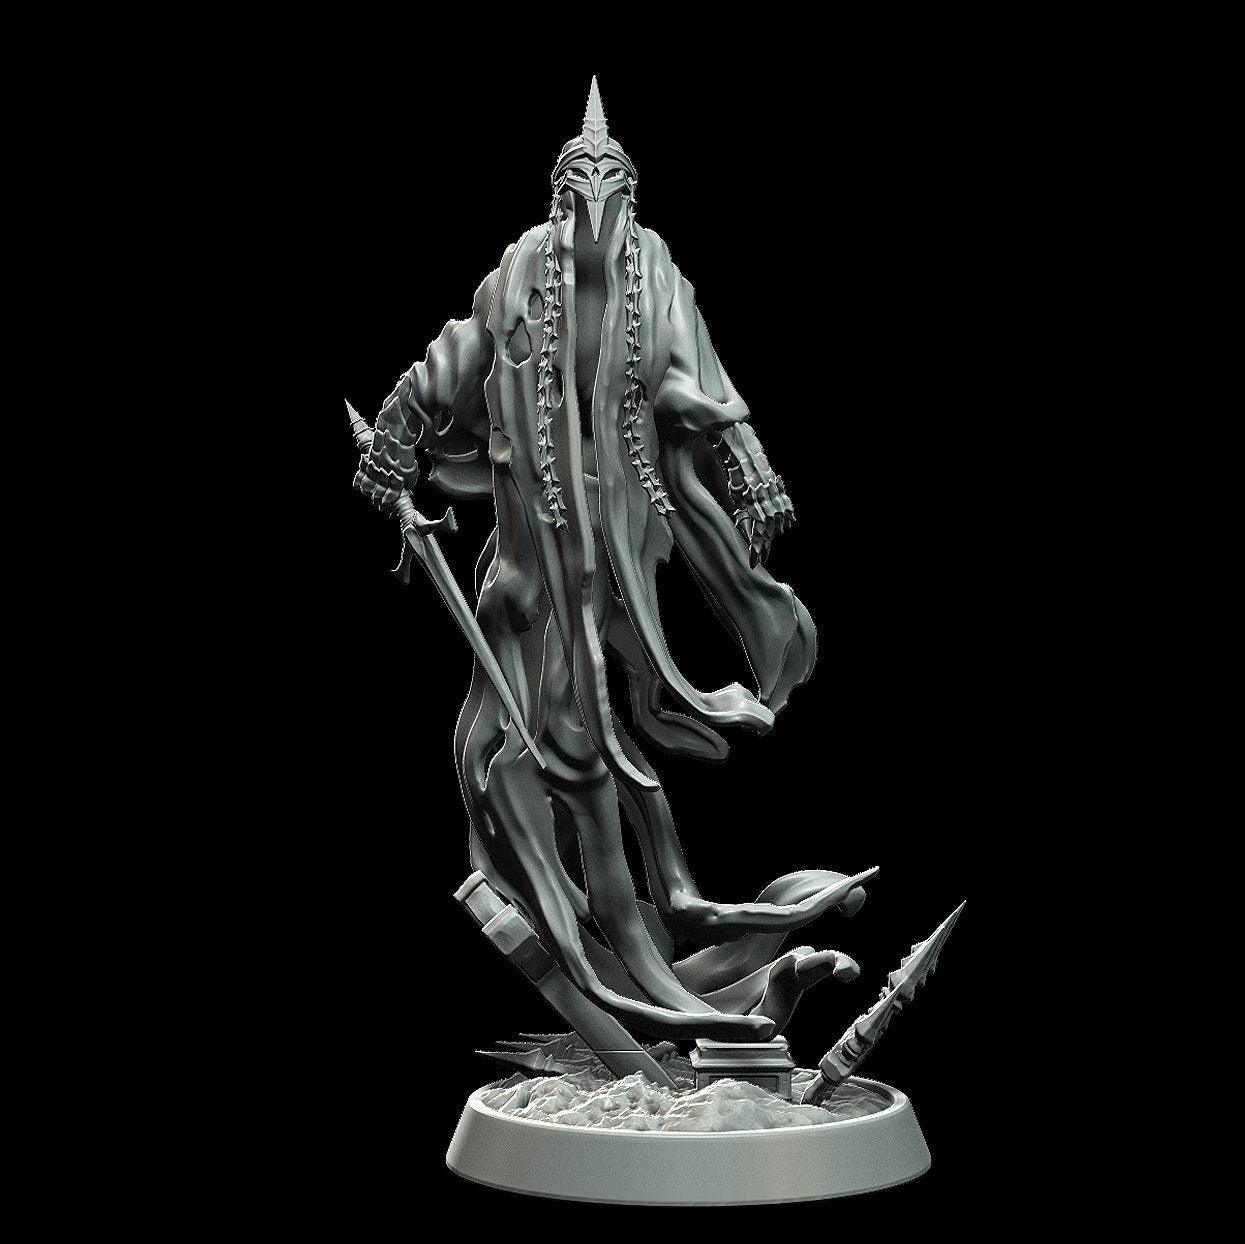 Damned Spirit Miniature - 3 Poses - 28mm scale Tabletop gaming DnD Miniature Dungeons and Dragons, ttrpg dnd 5e - Plague Miniatures shop for DnD Miniatures